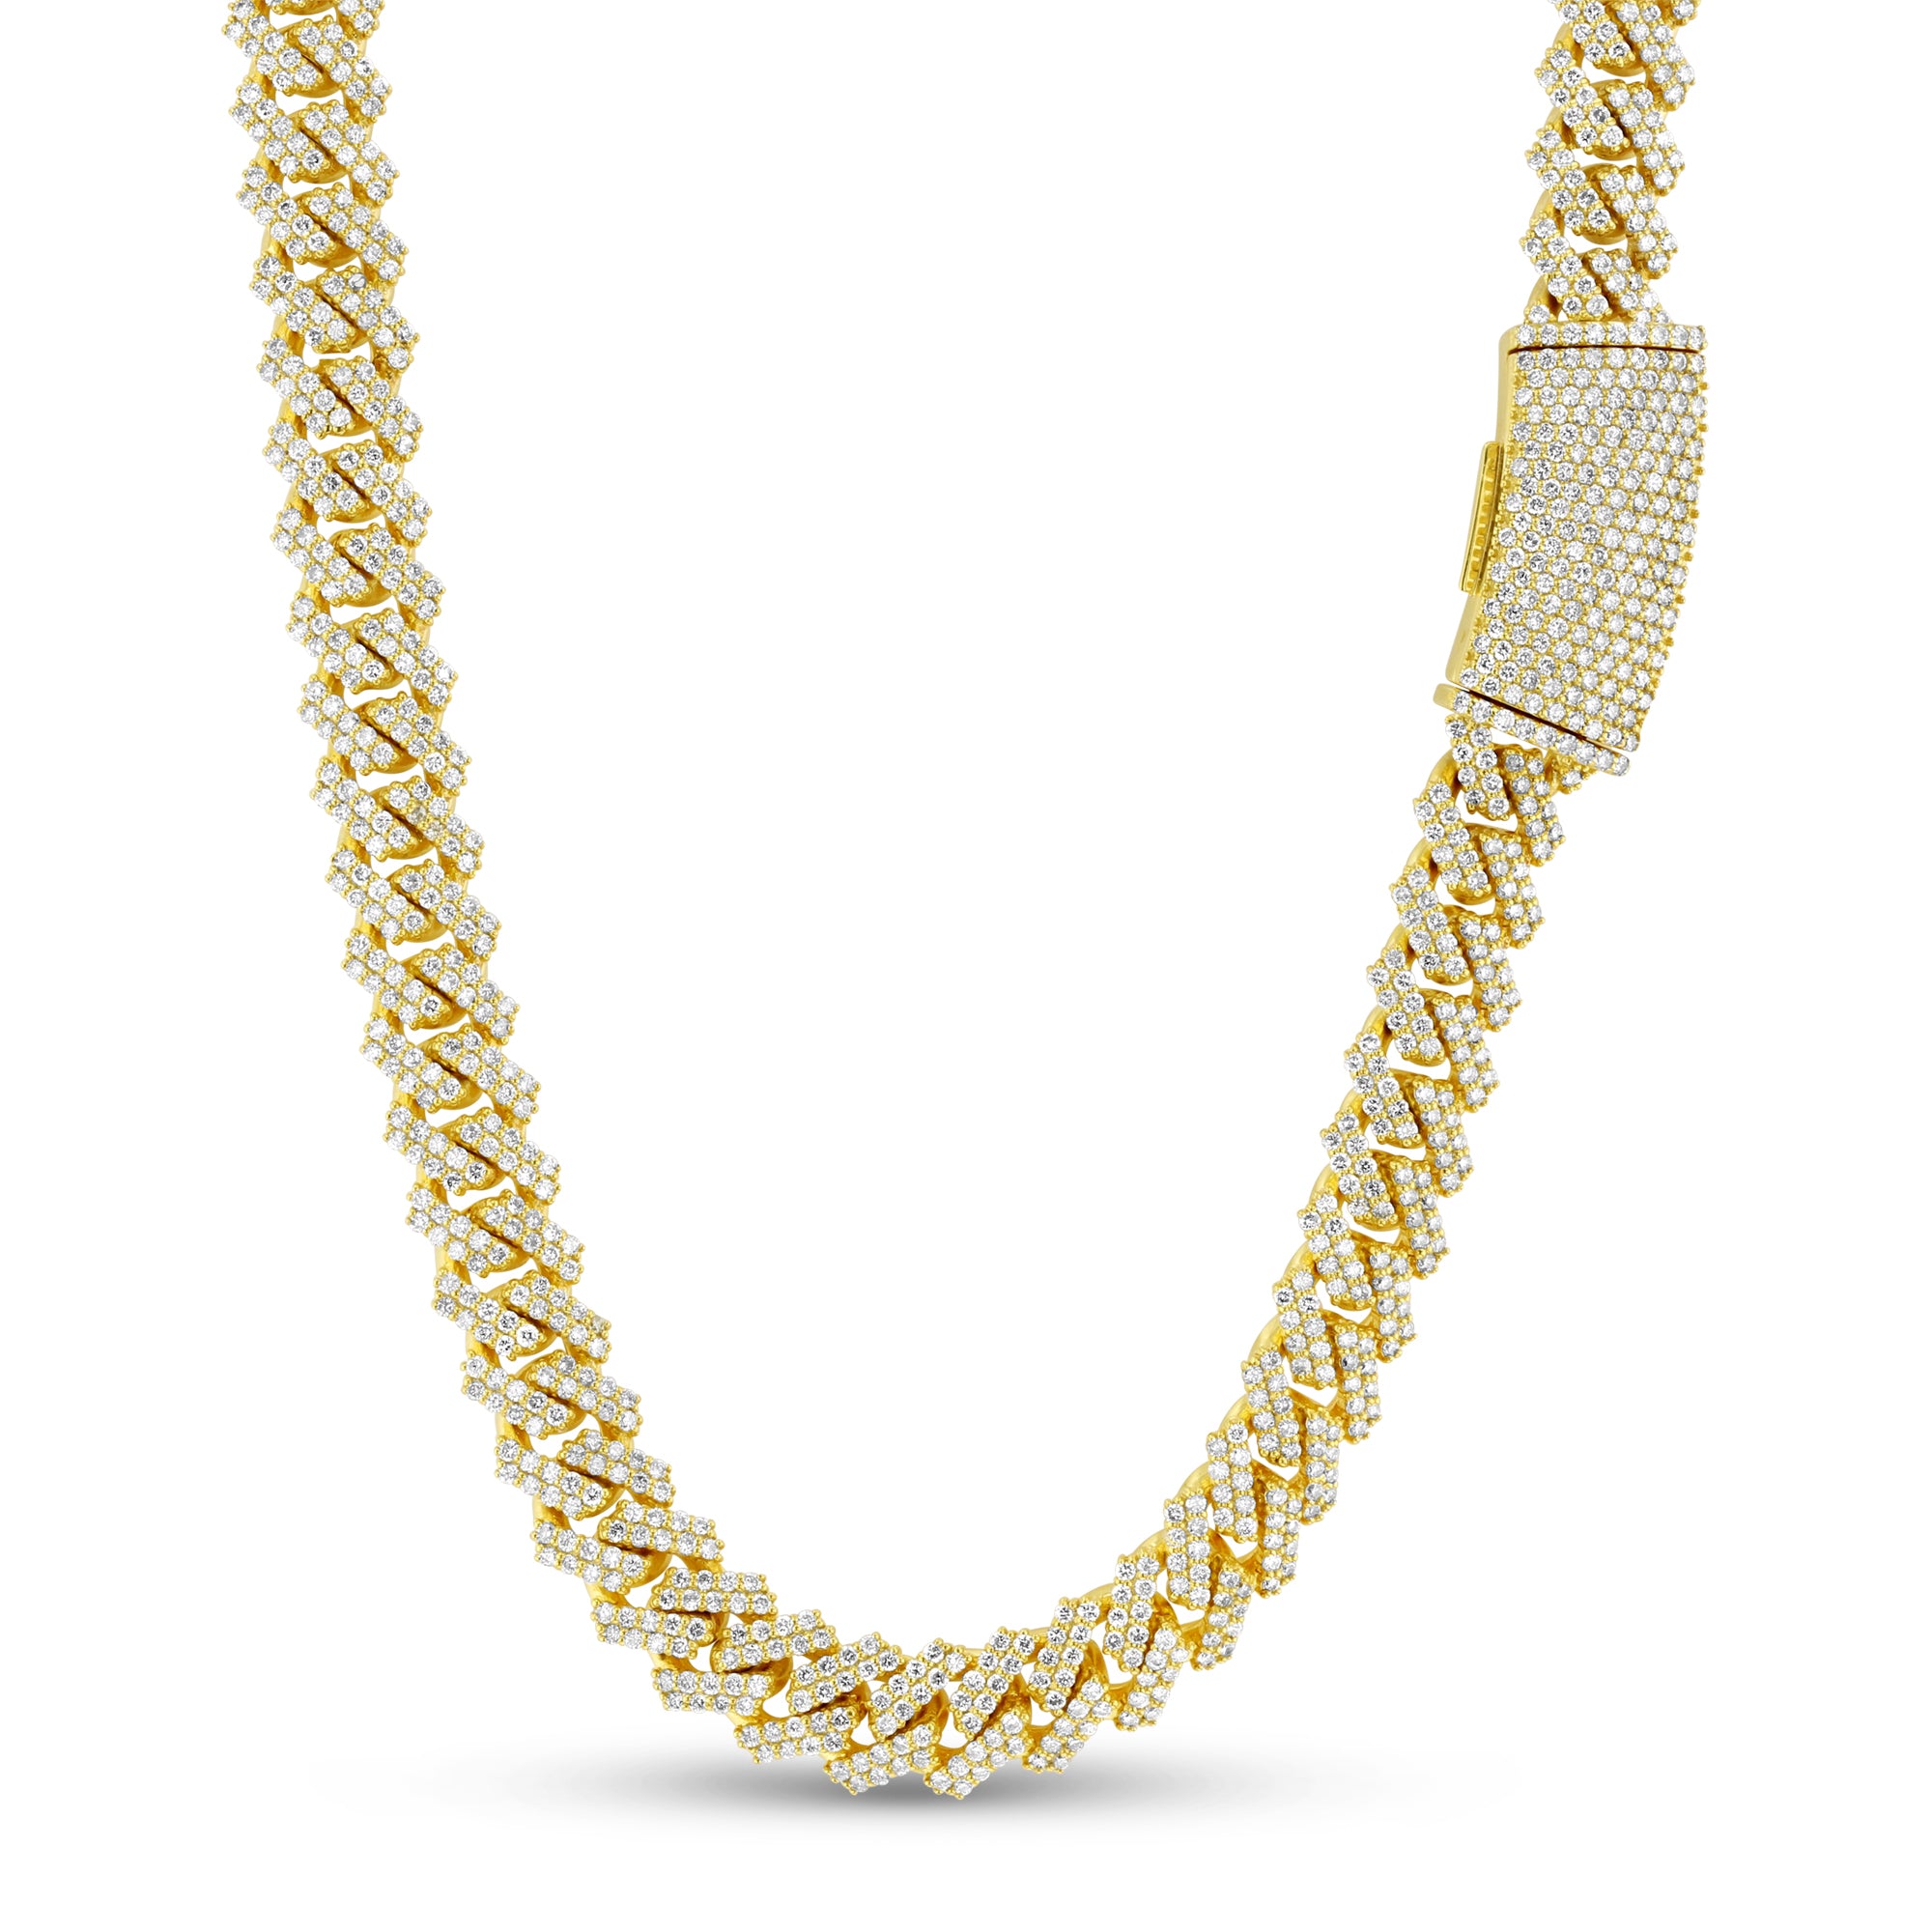 Diamond Men's Prong Cuban Chain 22 inch Necklace in 14kt 18.95 c.t.w.